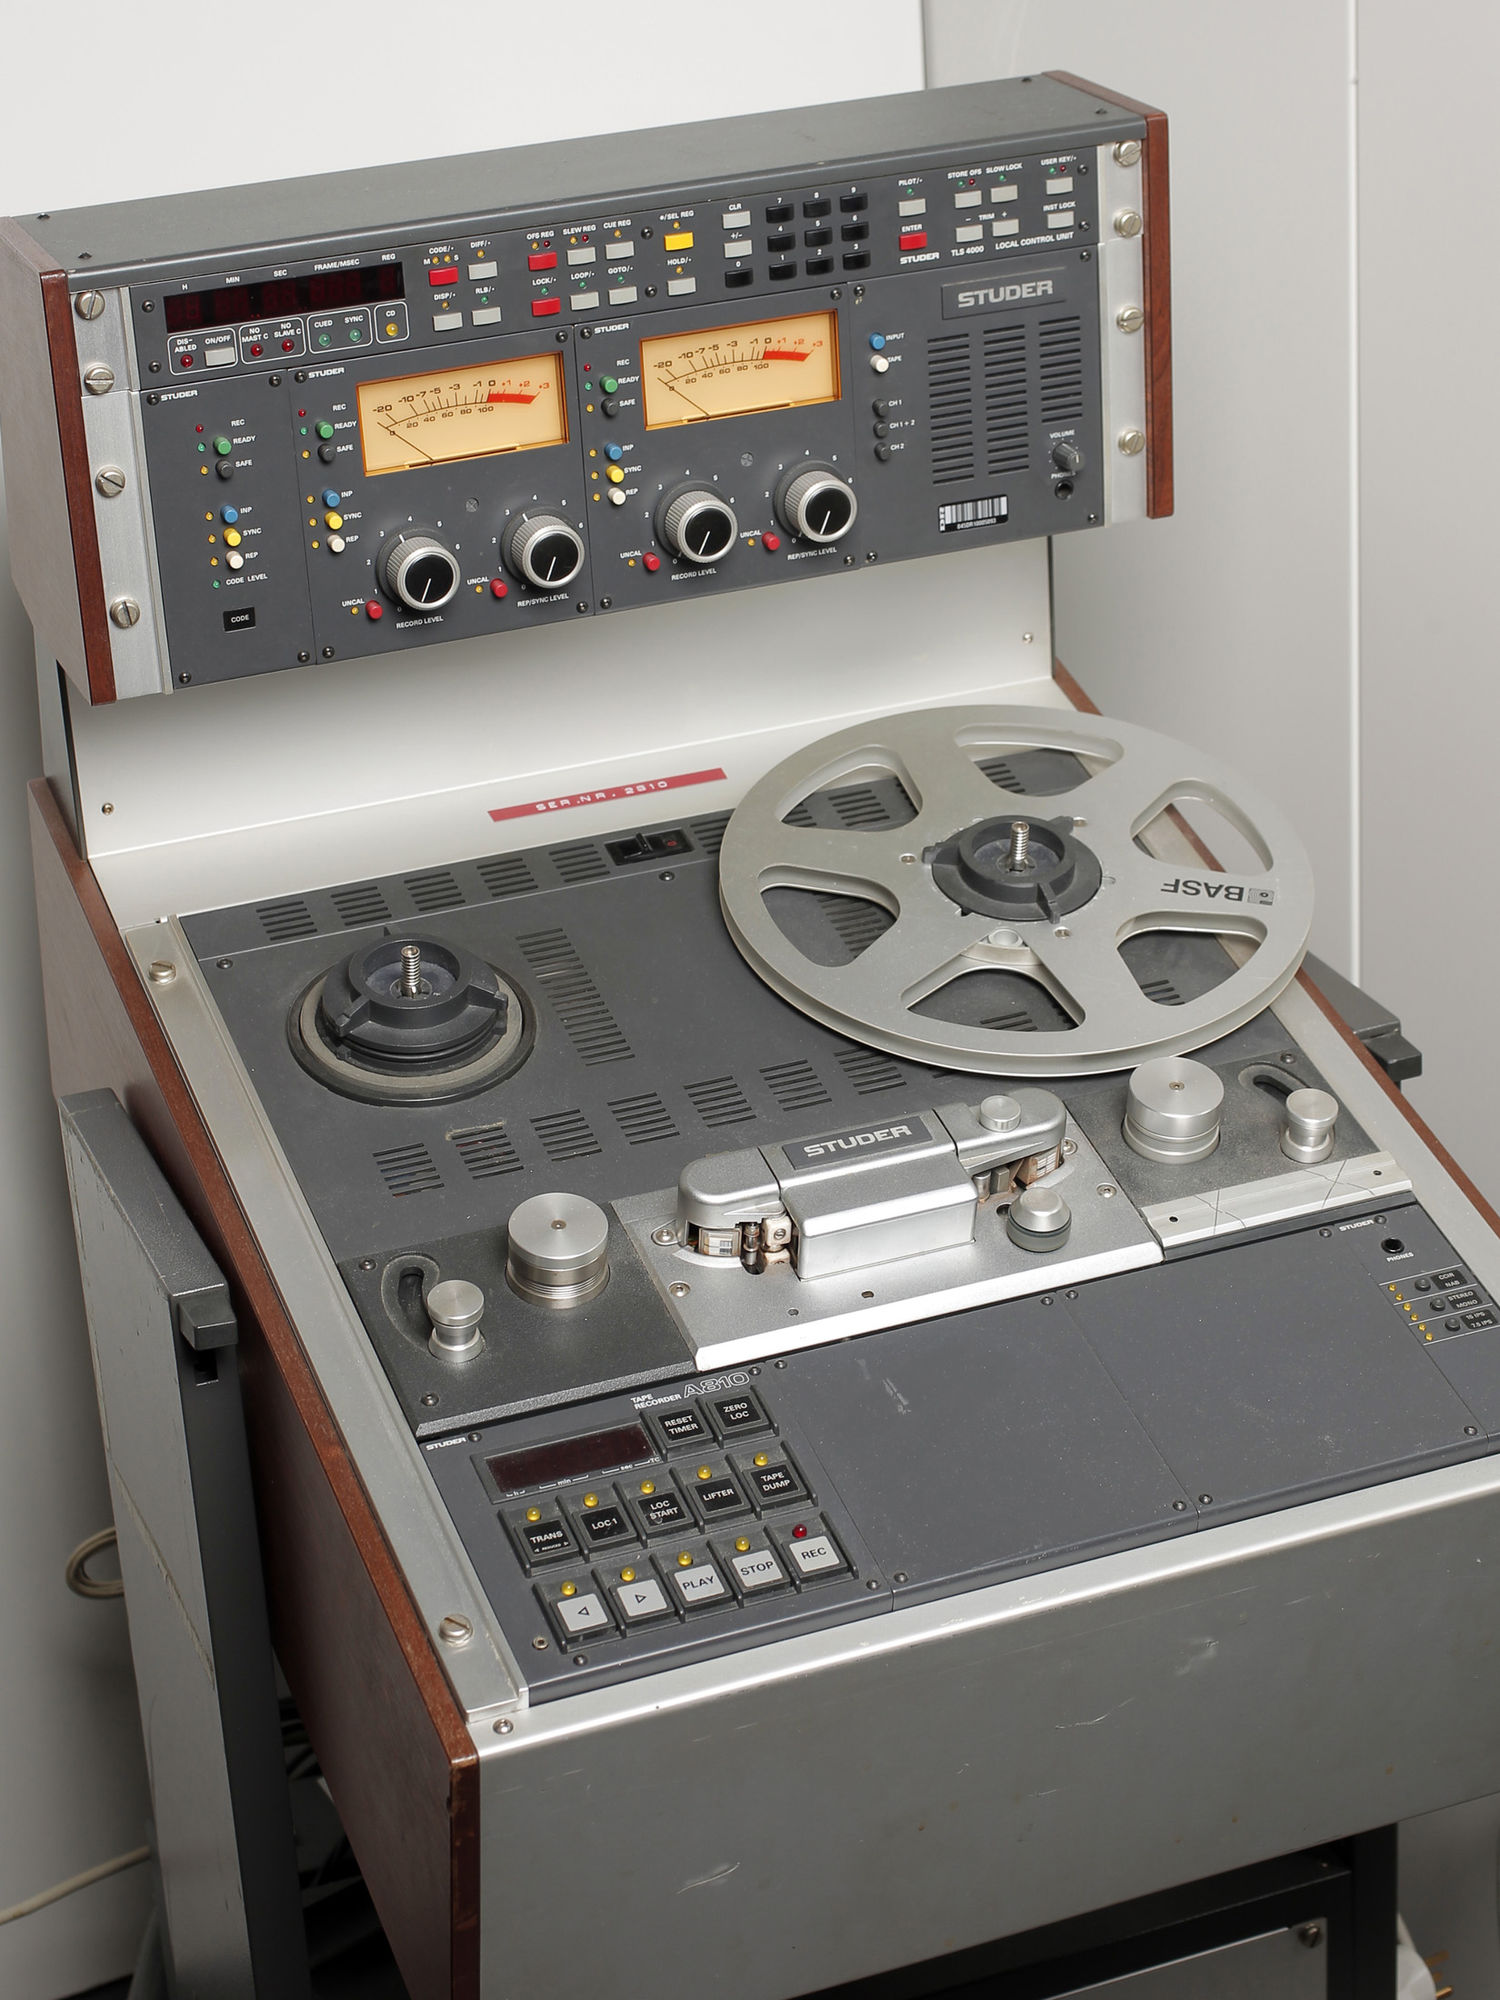 Man using a reel-to-reel audio tape recorder] - UNT Digital Library